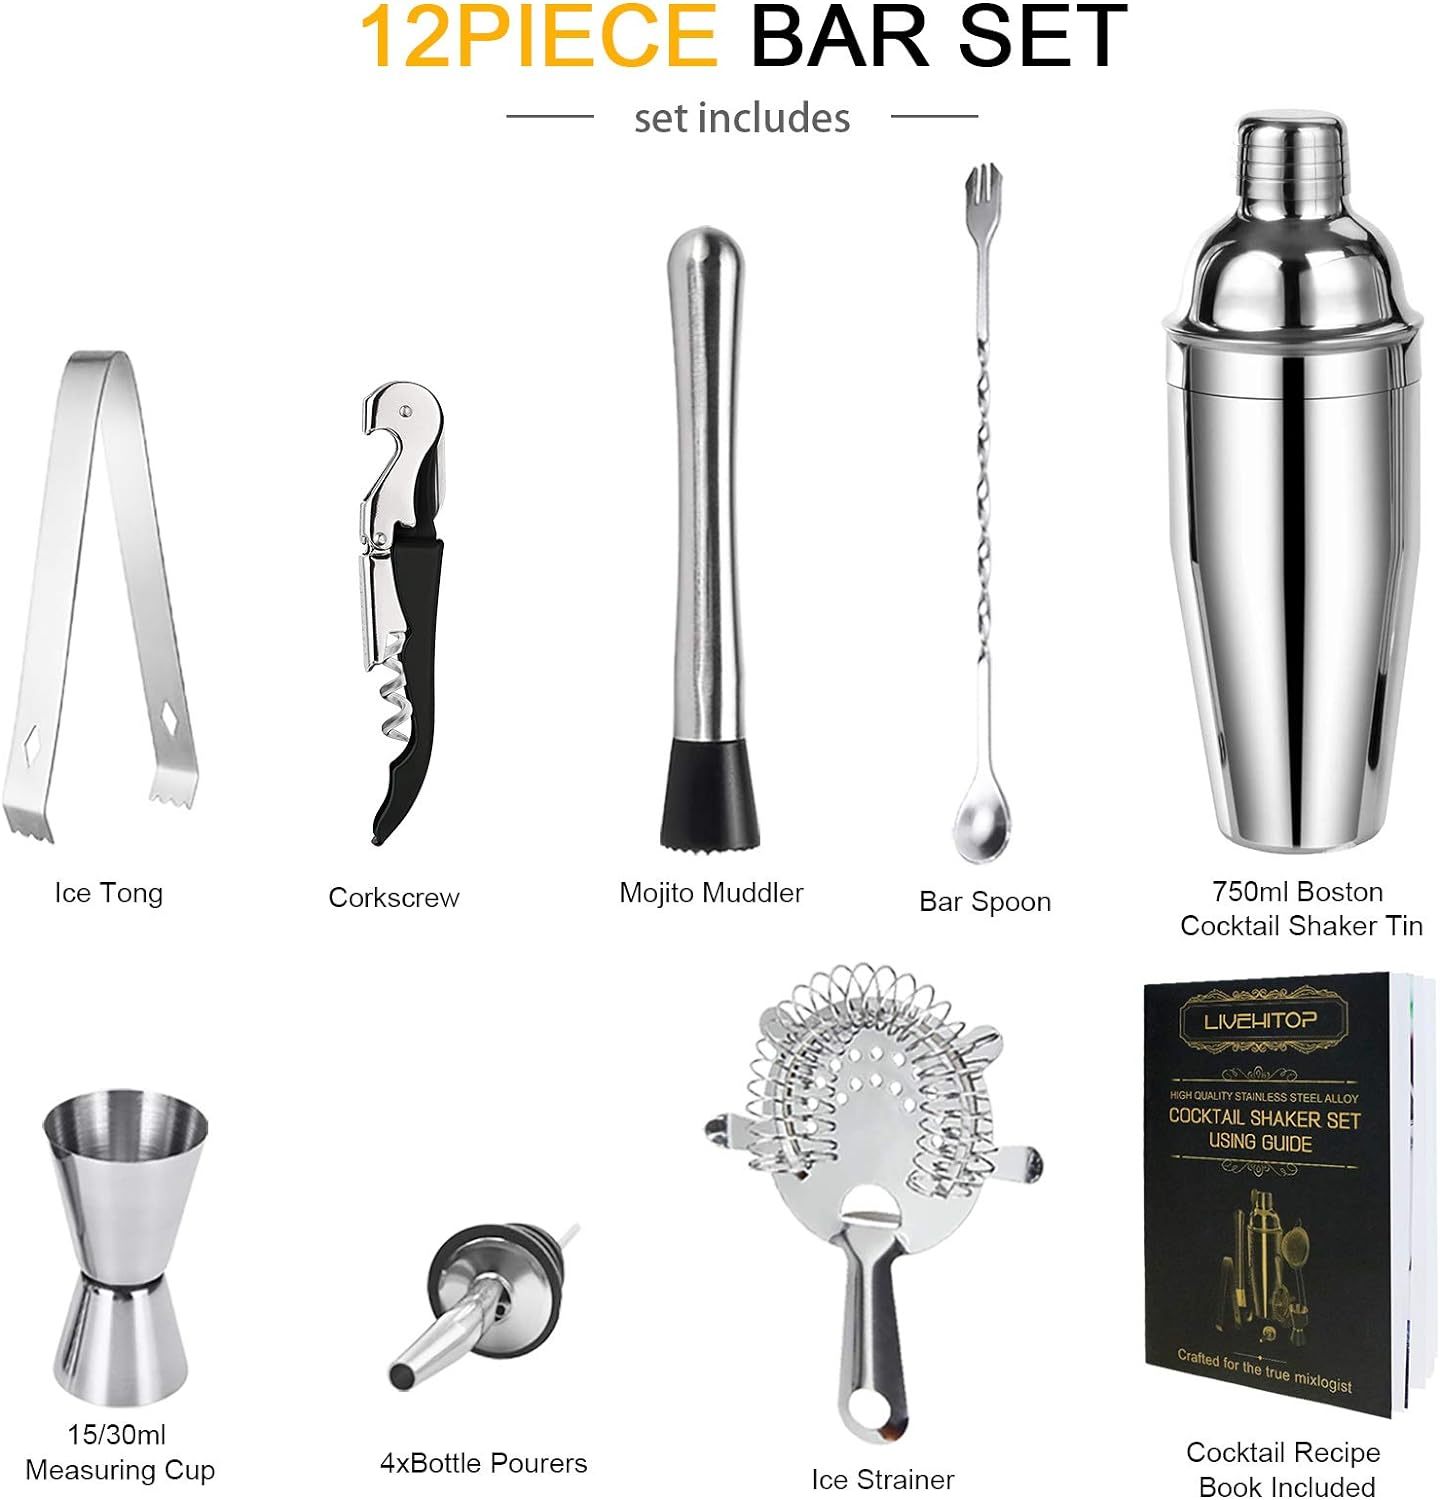 LIVEHITOP Cocktail Shaker Set, 12 Pieces Cocktail Making Set with 750 ML Cocktail Shaker Professional Bartender Kit for Bar, Party, Home